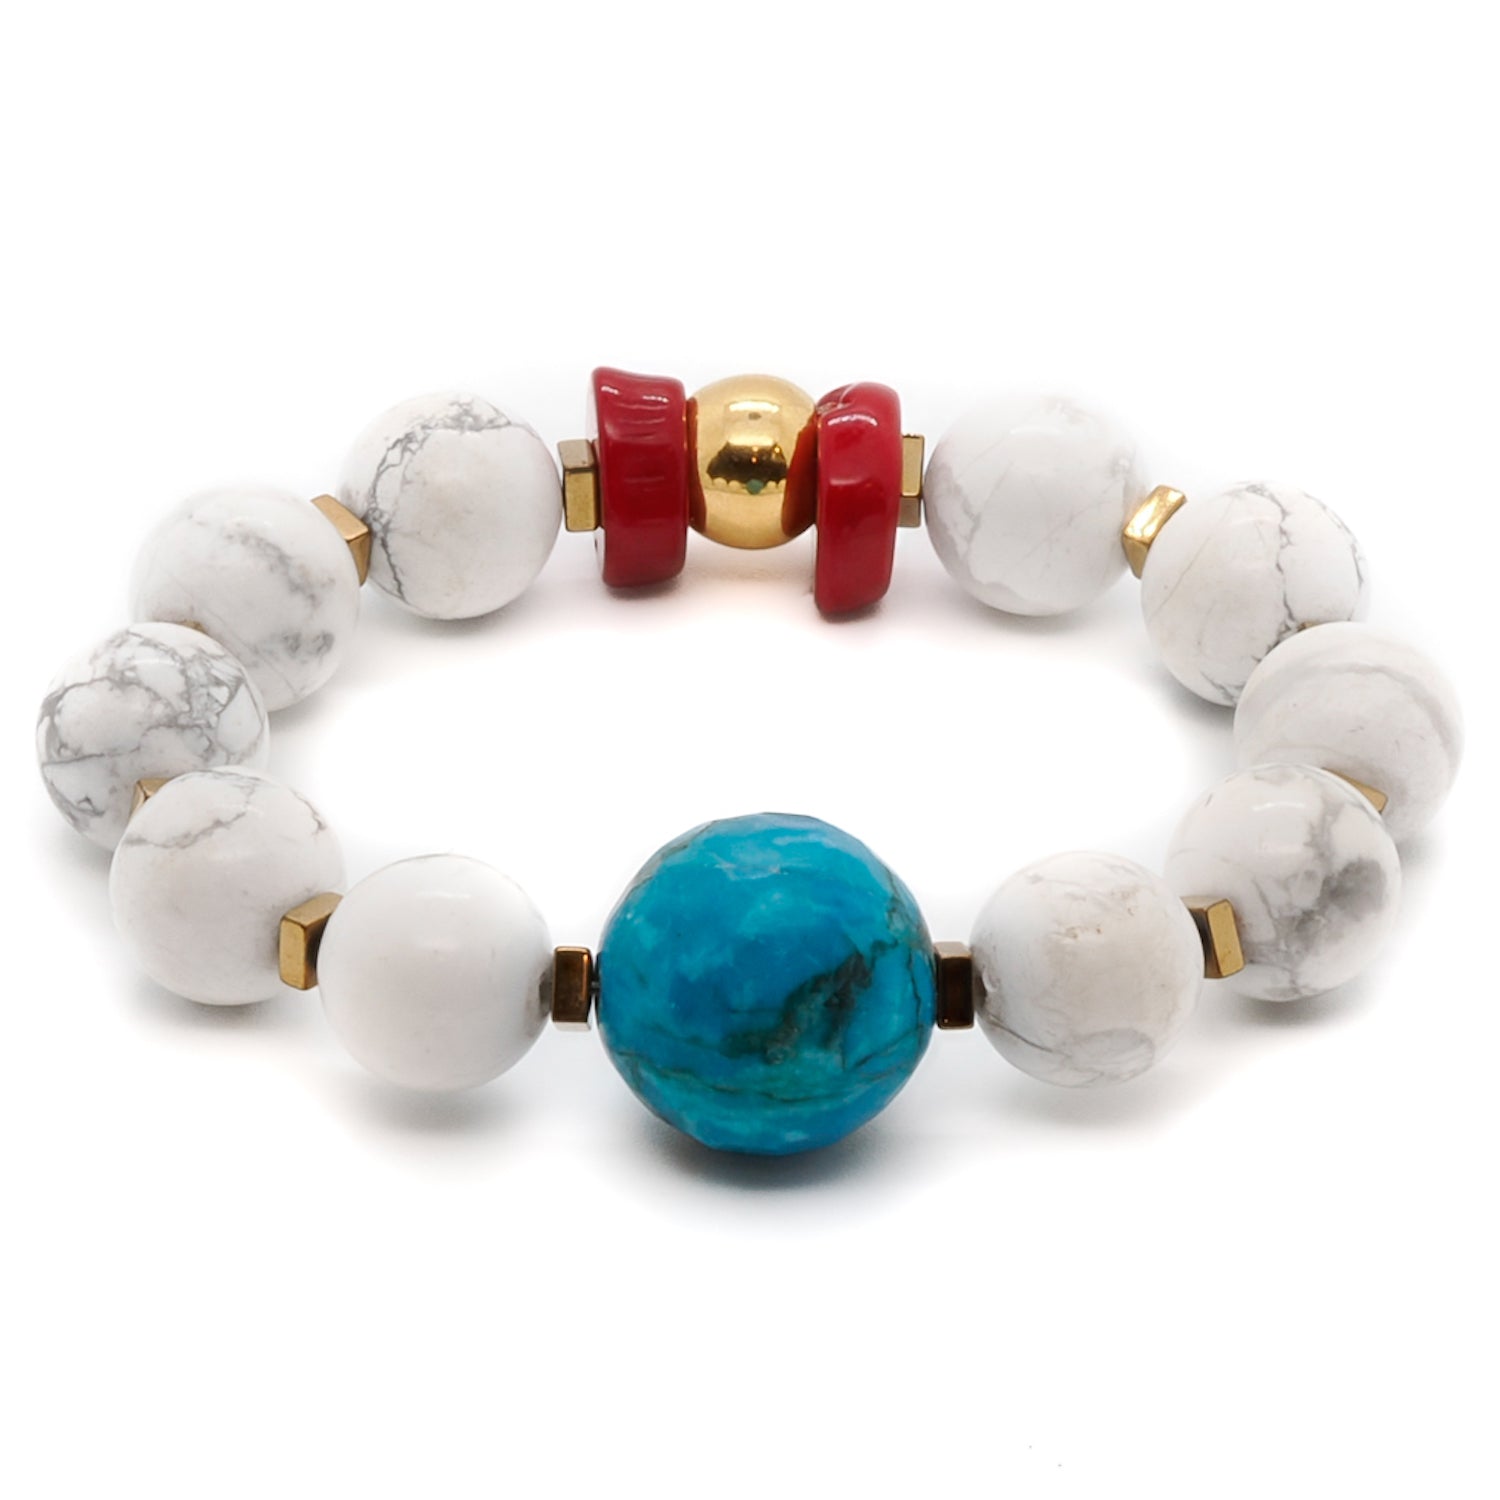 Embrace the beauty of the Turquoise Balance Bracelet, featuring turquoise, howlite, and red coral stone beads.